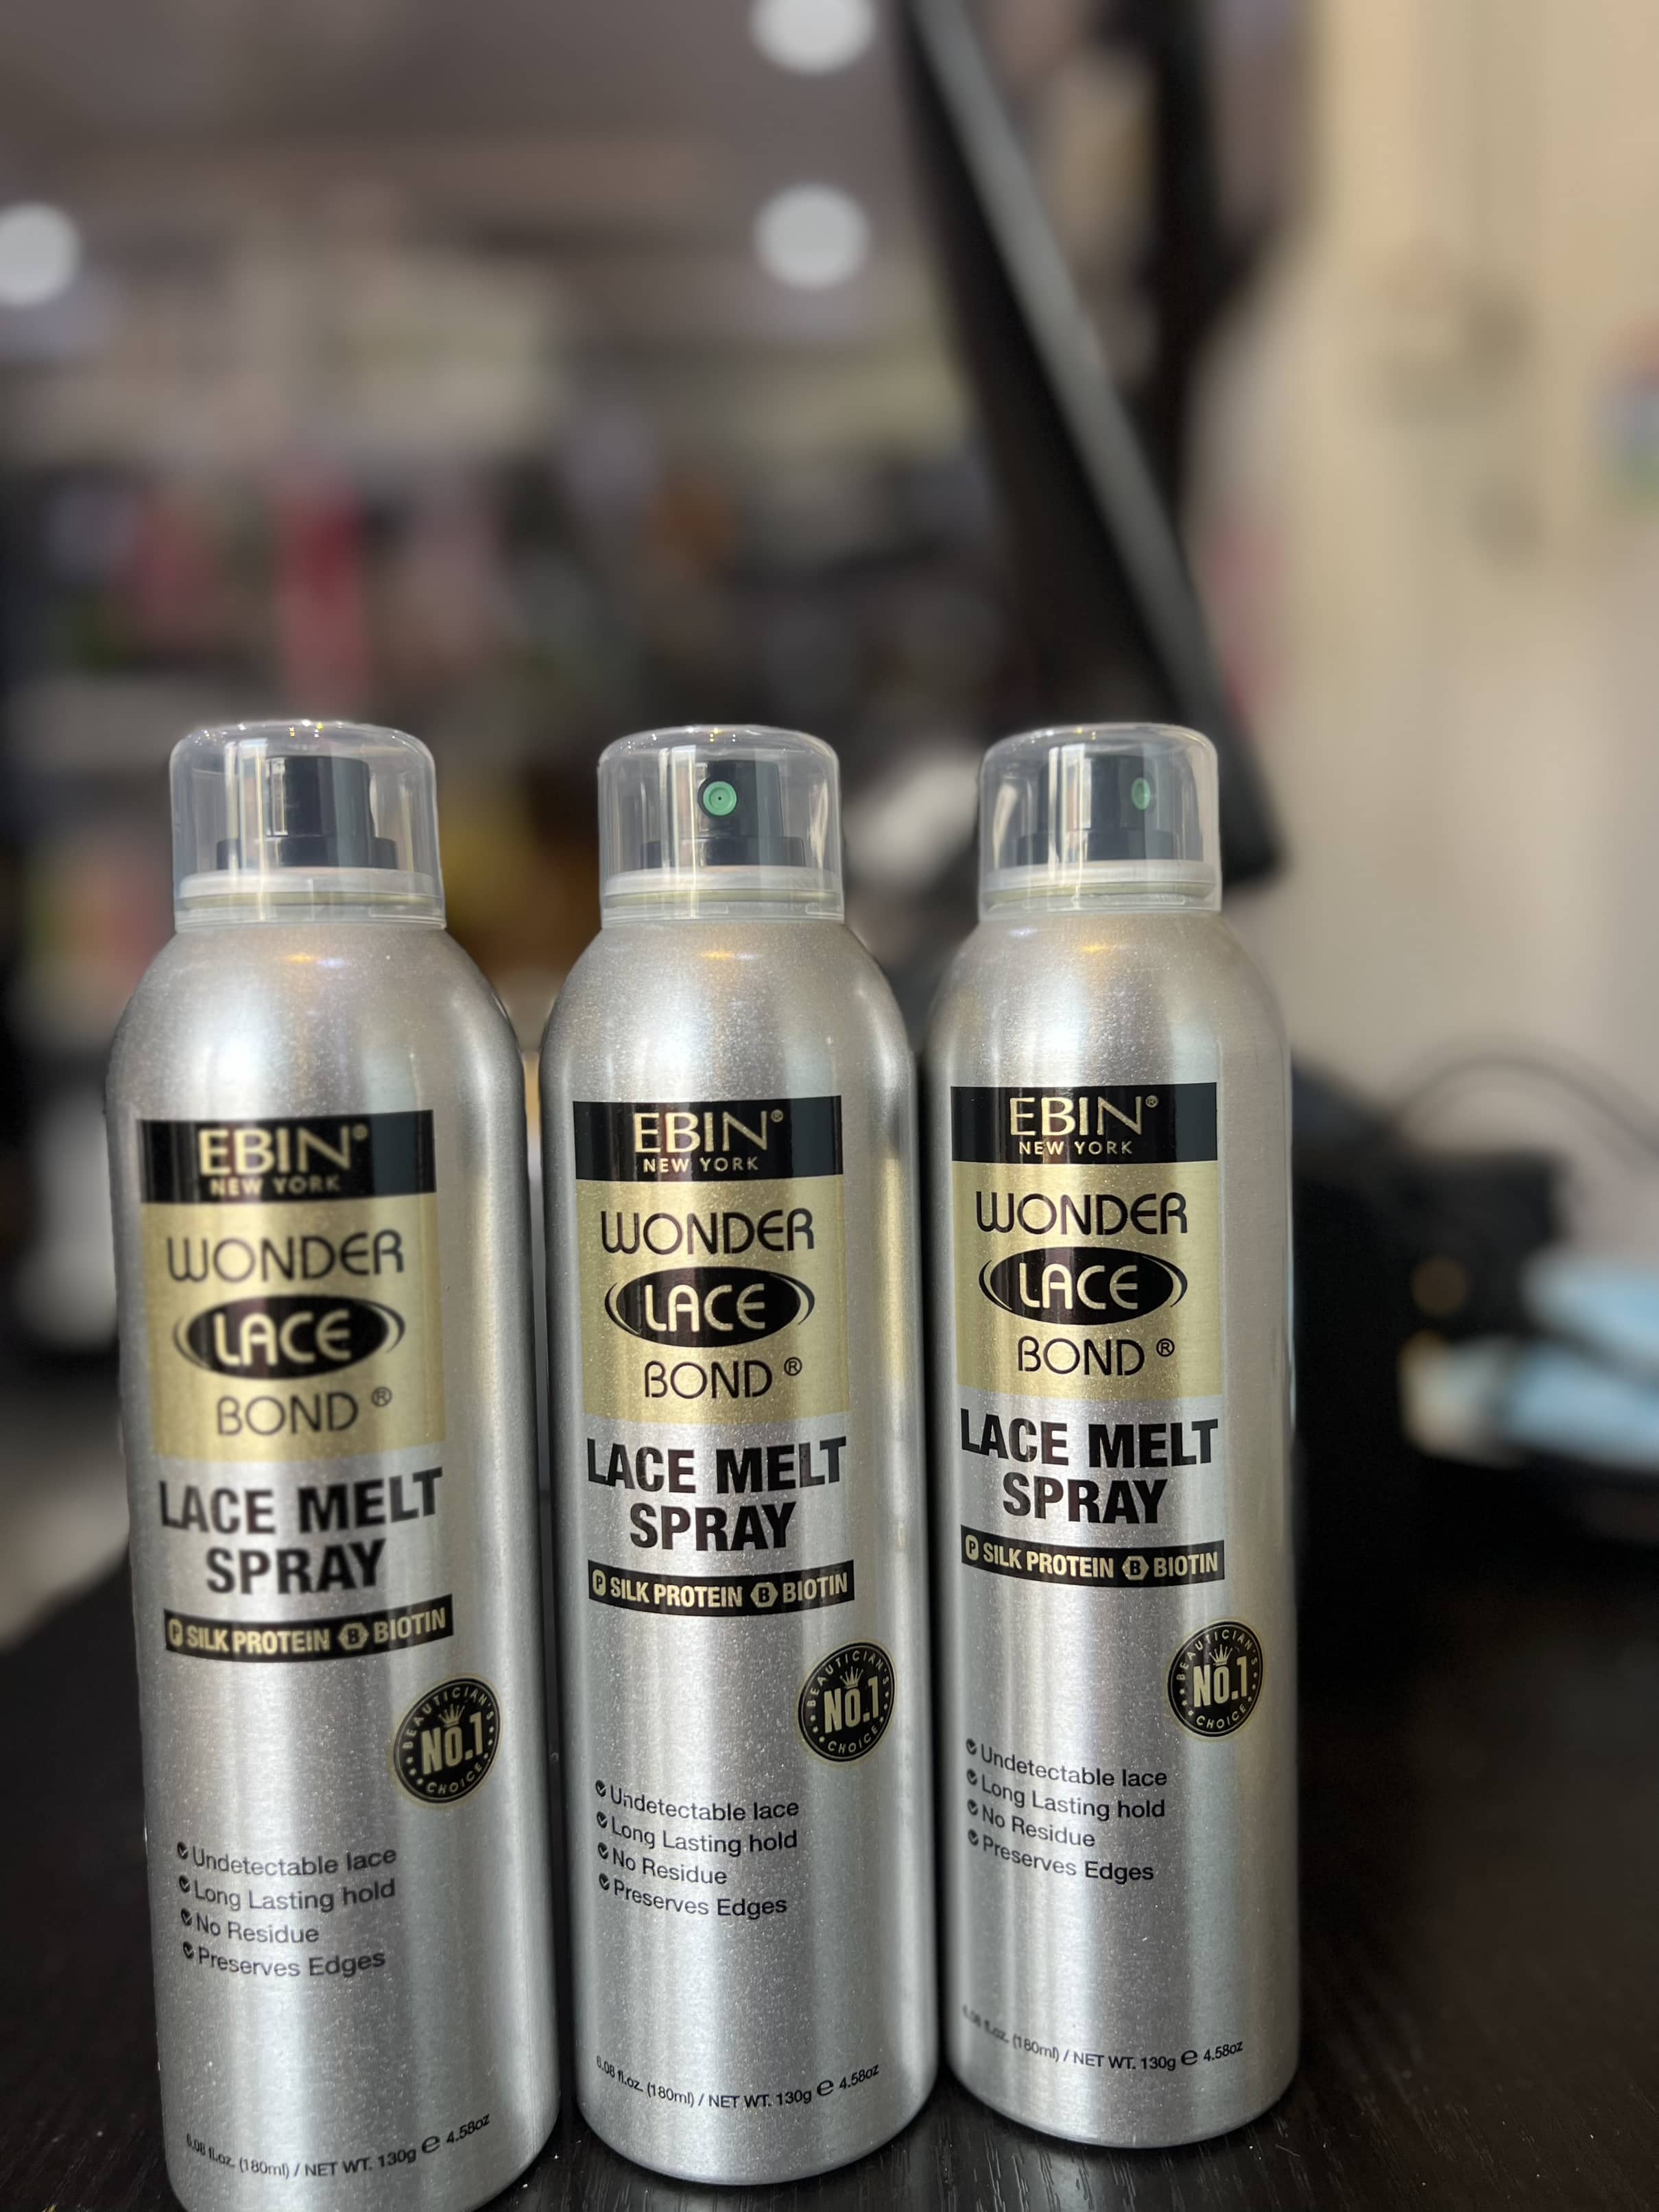 We are one of the first shops to have EBIN Lace Melt Spray in the UK!!